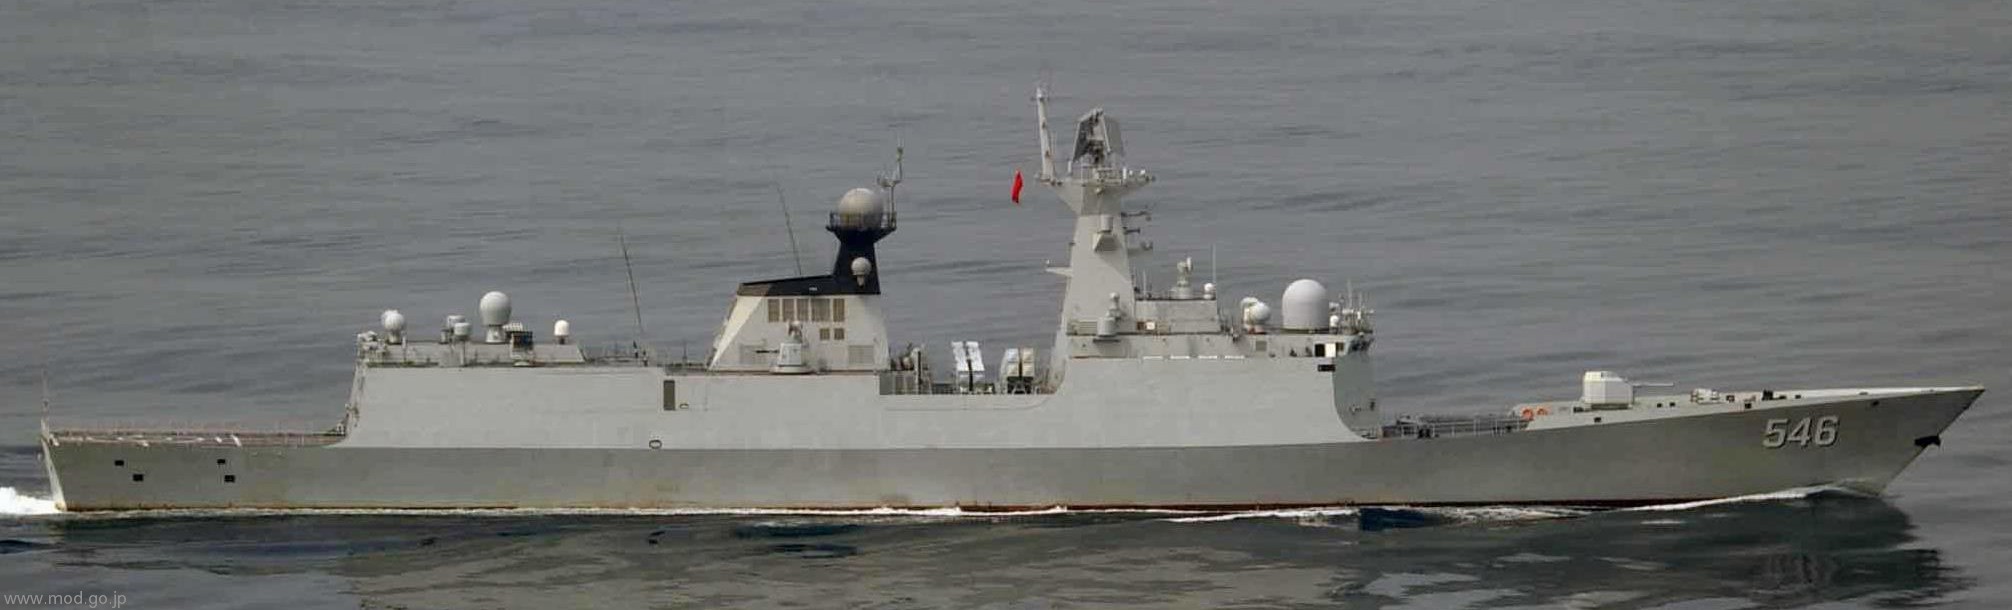 ffg-546 plans yancheng type 054a jiangkai ii class guided missile frigate china people's liberation army navy 02